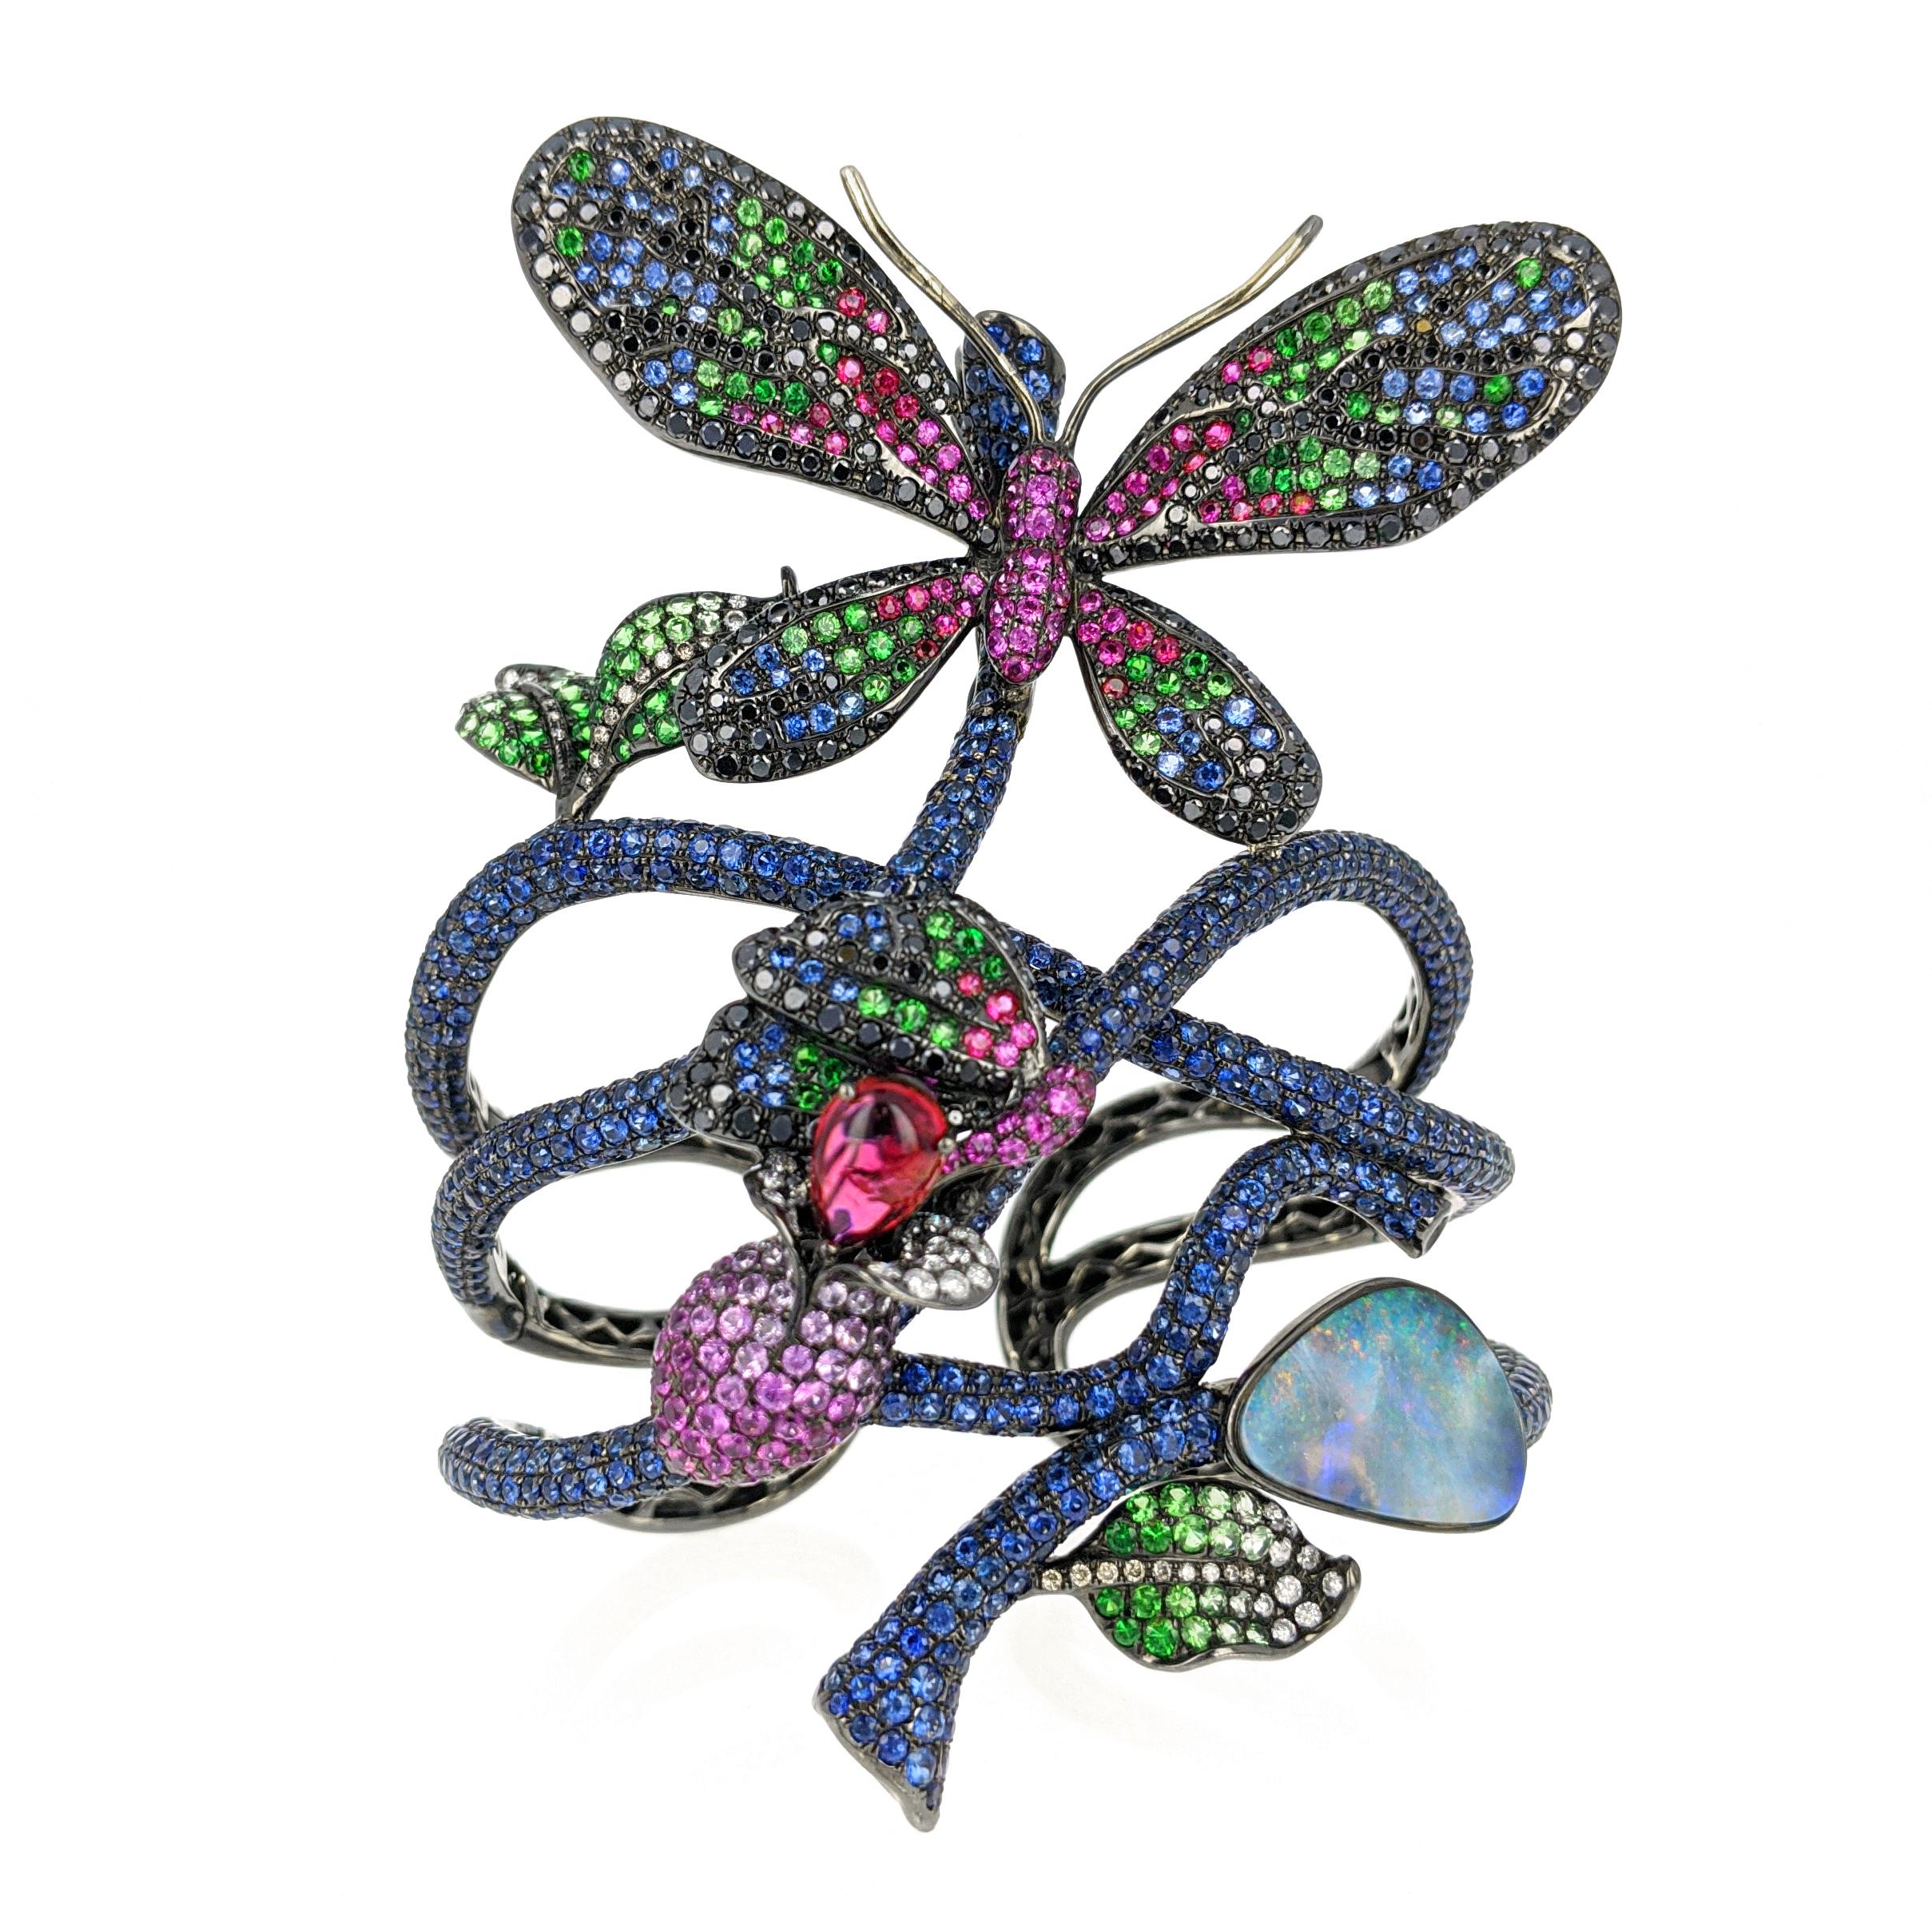 This whimsical and vibrant 'Madame Butterfly' cuff bracelet by Wendy Yue features a butterfly motif consisting of blue and pink sapphires, rubies, colorless and black diamonds, tsavorites, tourmaline and opal mounted in 18 karat blackened gold. The